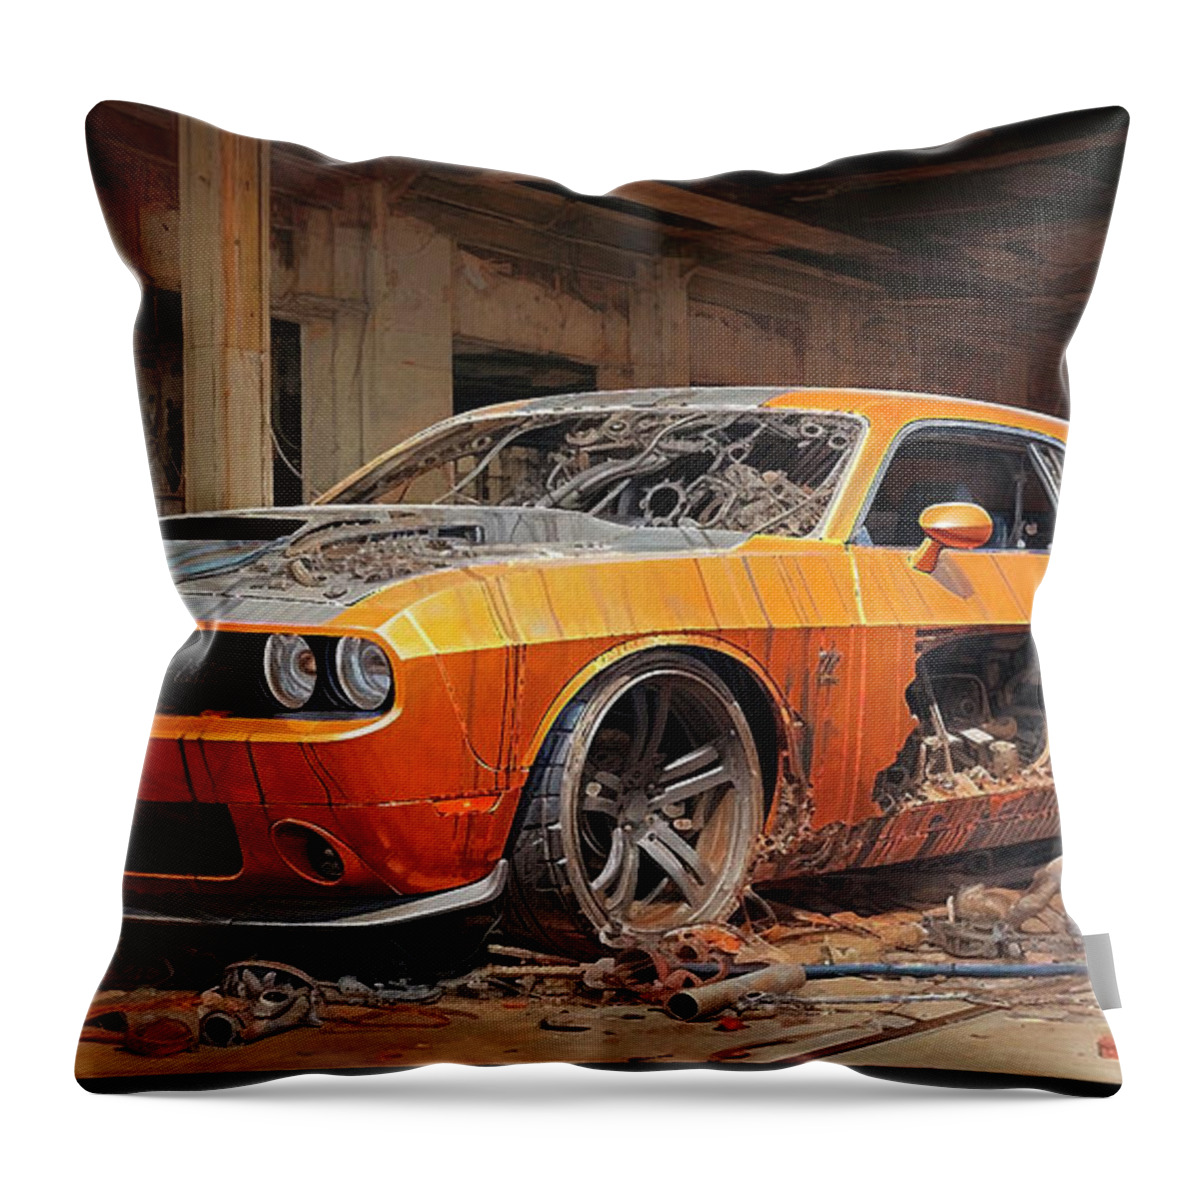 Vehicles Throw Pillow featuring the drawing Muscle Car 1120 Dodge Challenger supercar by Clark Leffler